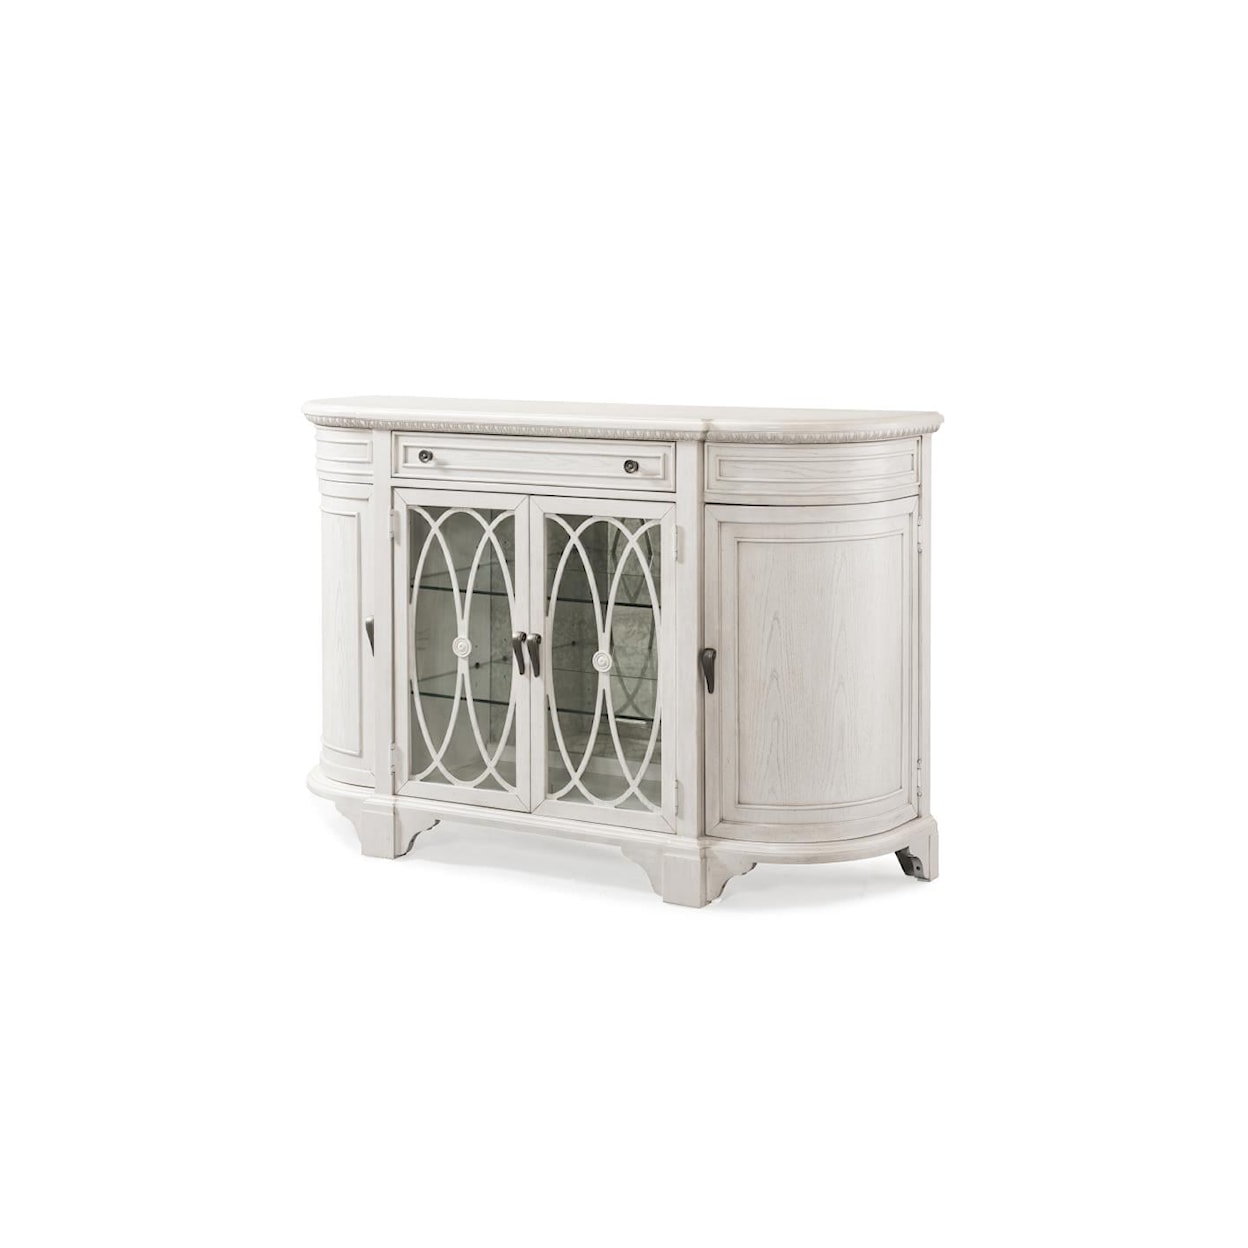 Trisha Yearwood Home Collection by Legacy Classic Jasper County Credenza